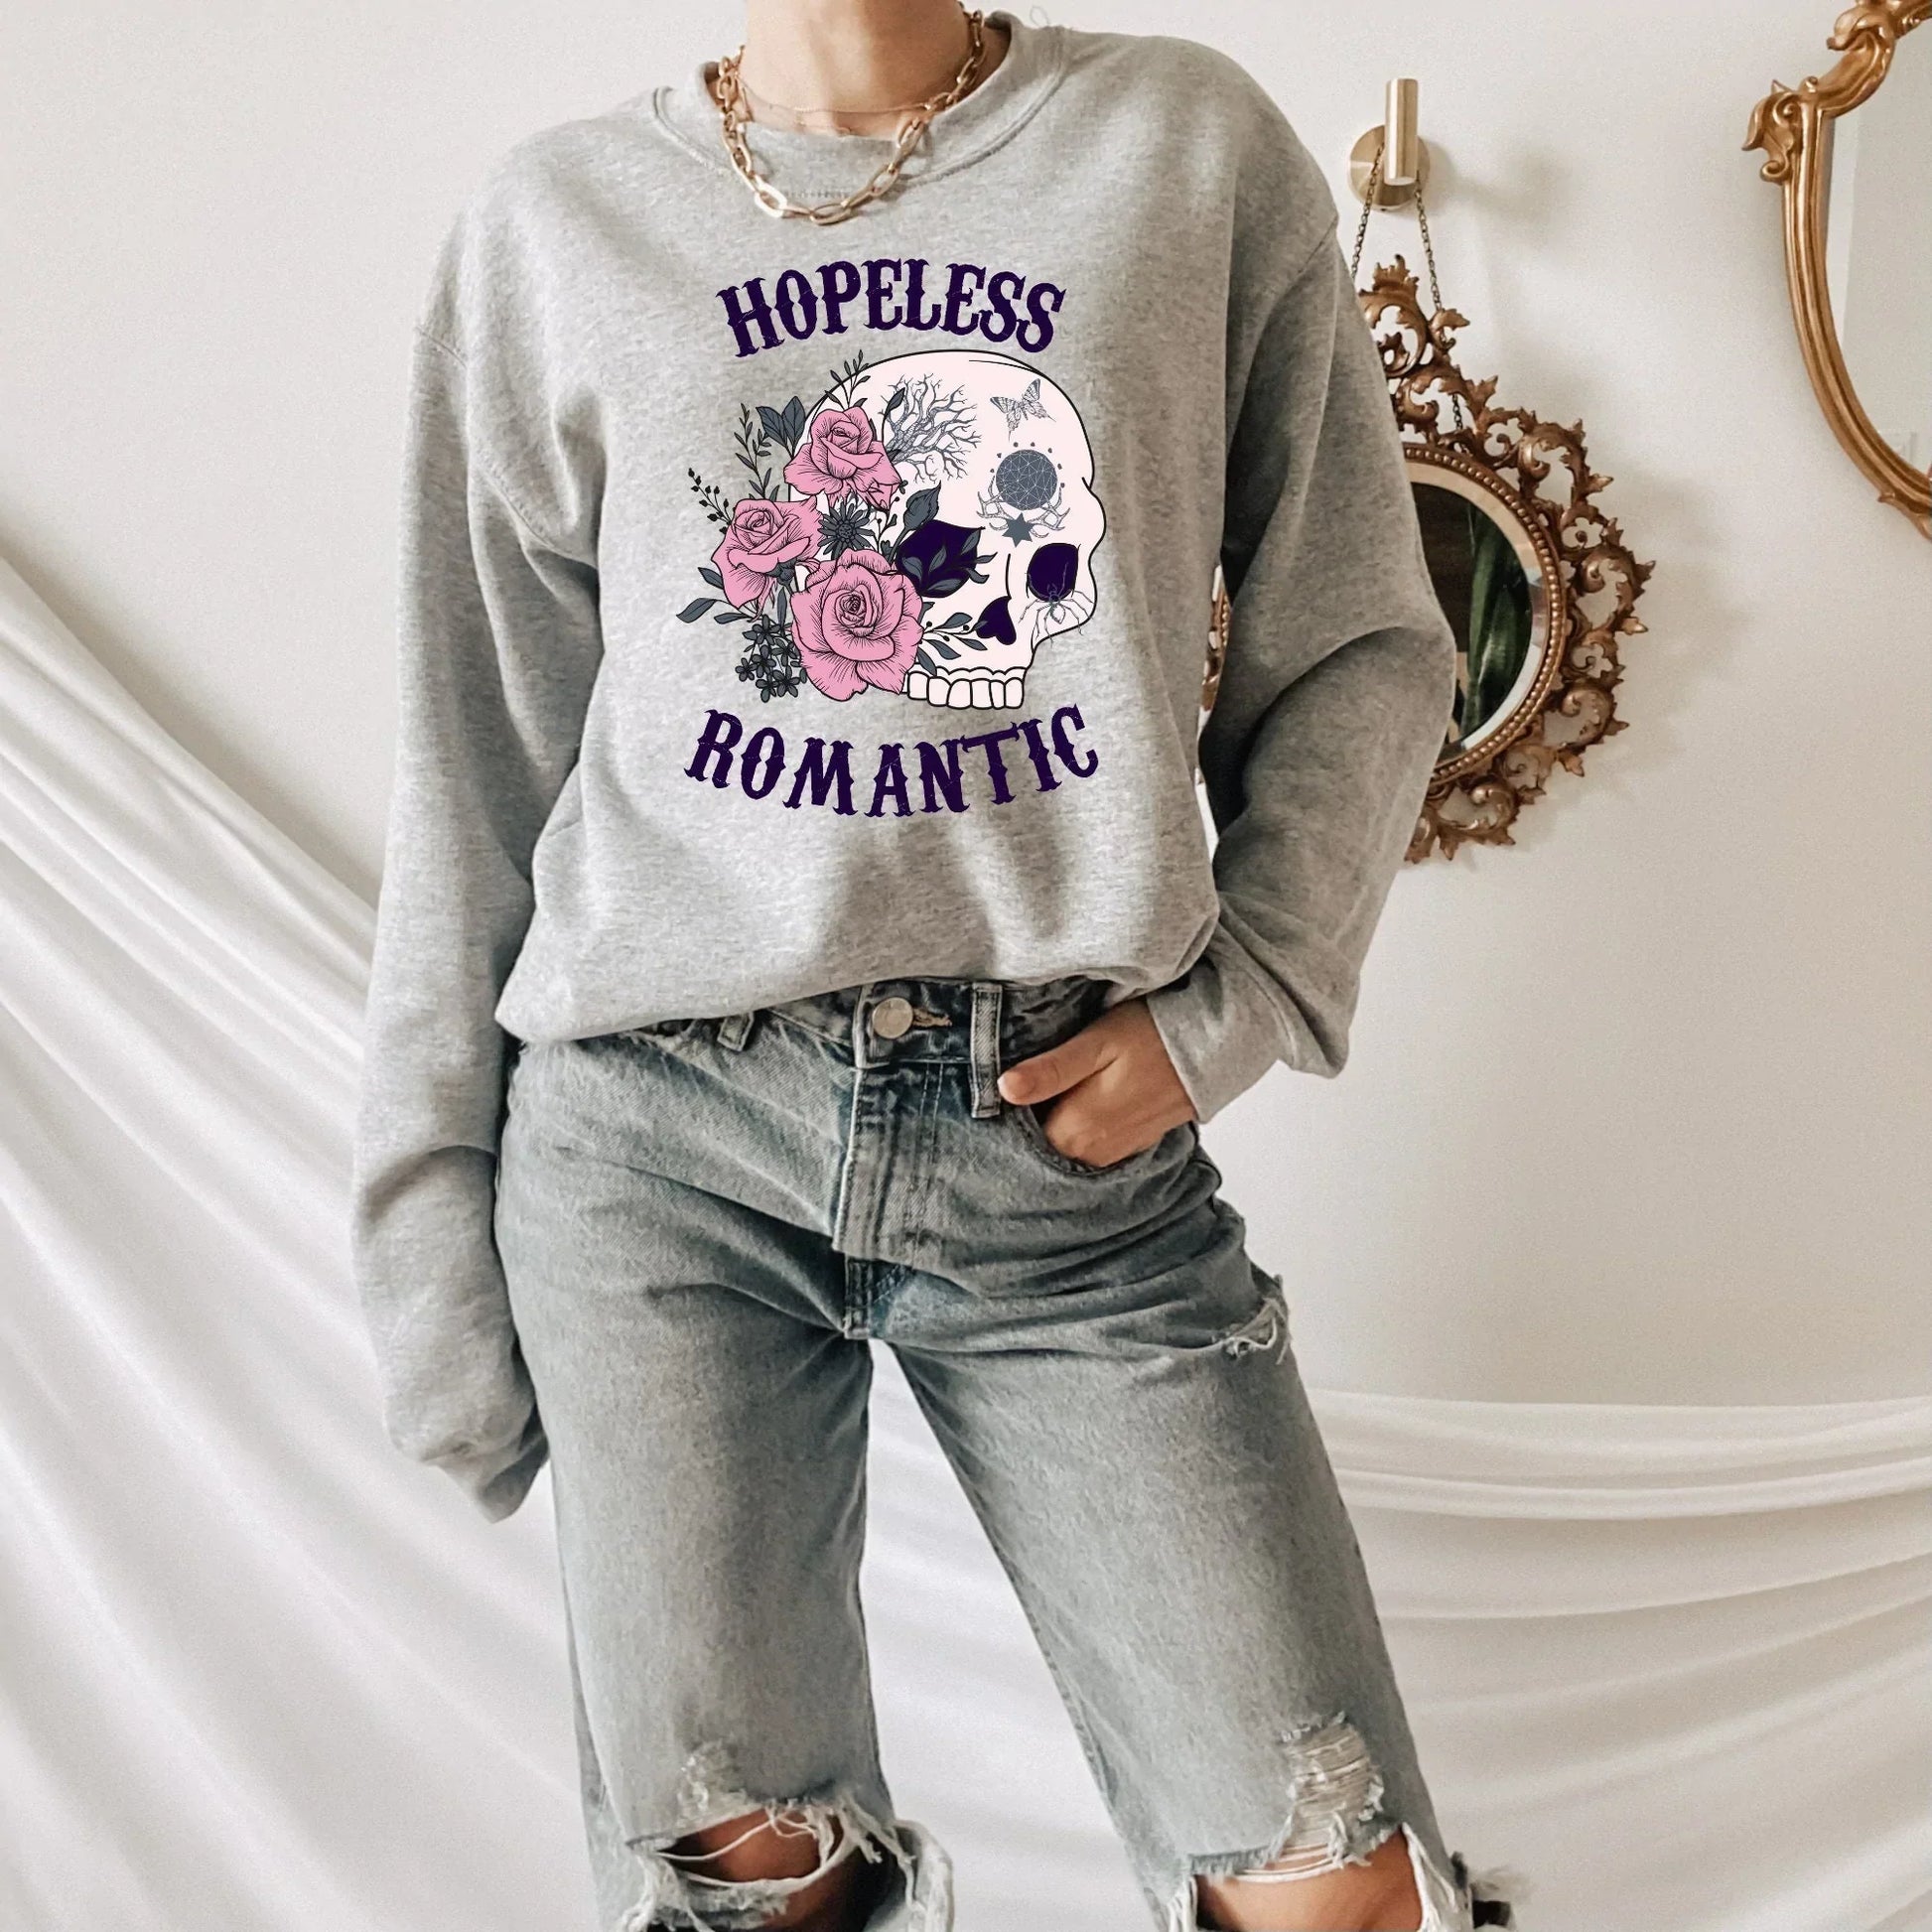 Gothic Shirt, Pastel Halloween Sweatshirt, Witchy Vibes, Skull Shirt Dead Roses Shirt, Magical Witch Shirt, Pastel Goth Style, EMO Tshirt